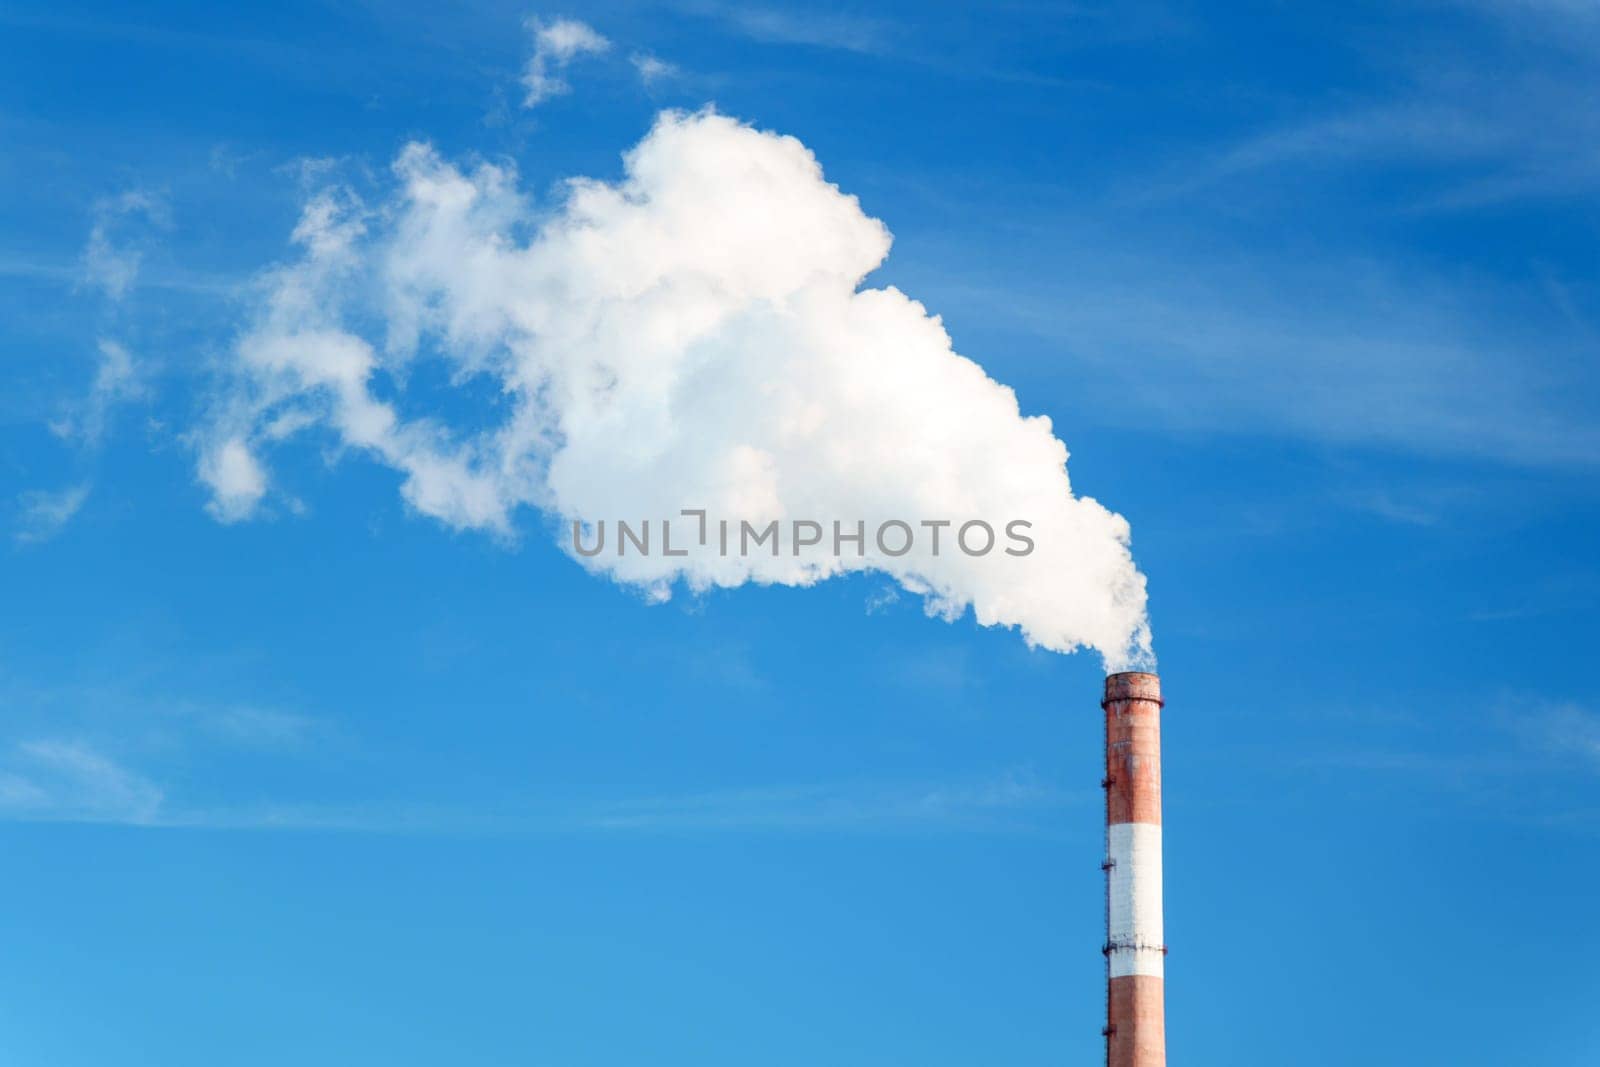 Smokestack emits thick smoke from a pipe, contrasting against a clear blue sky